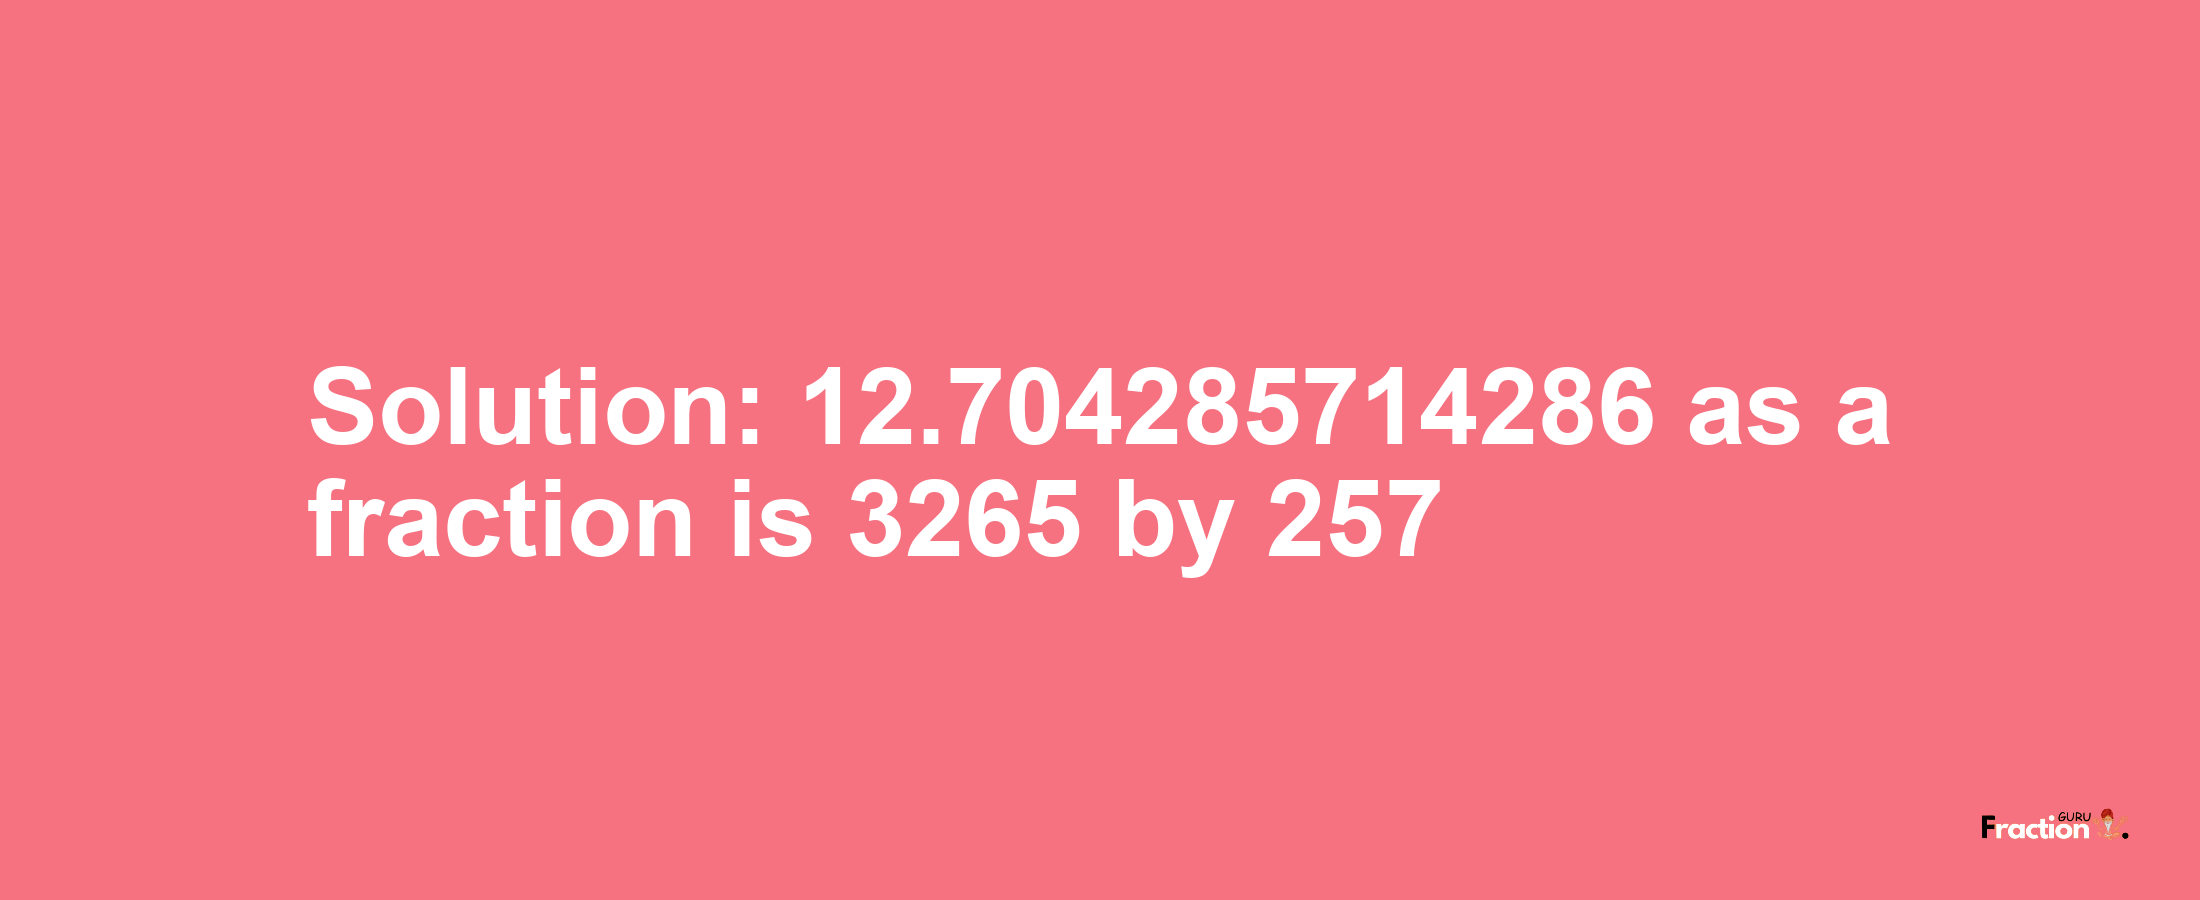 Solution:12.704285714286 as a fraction is 3265/257